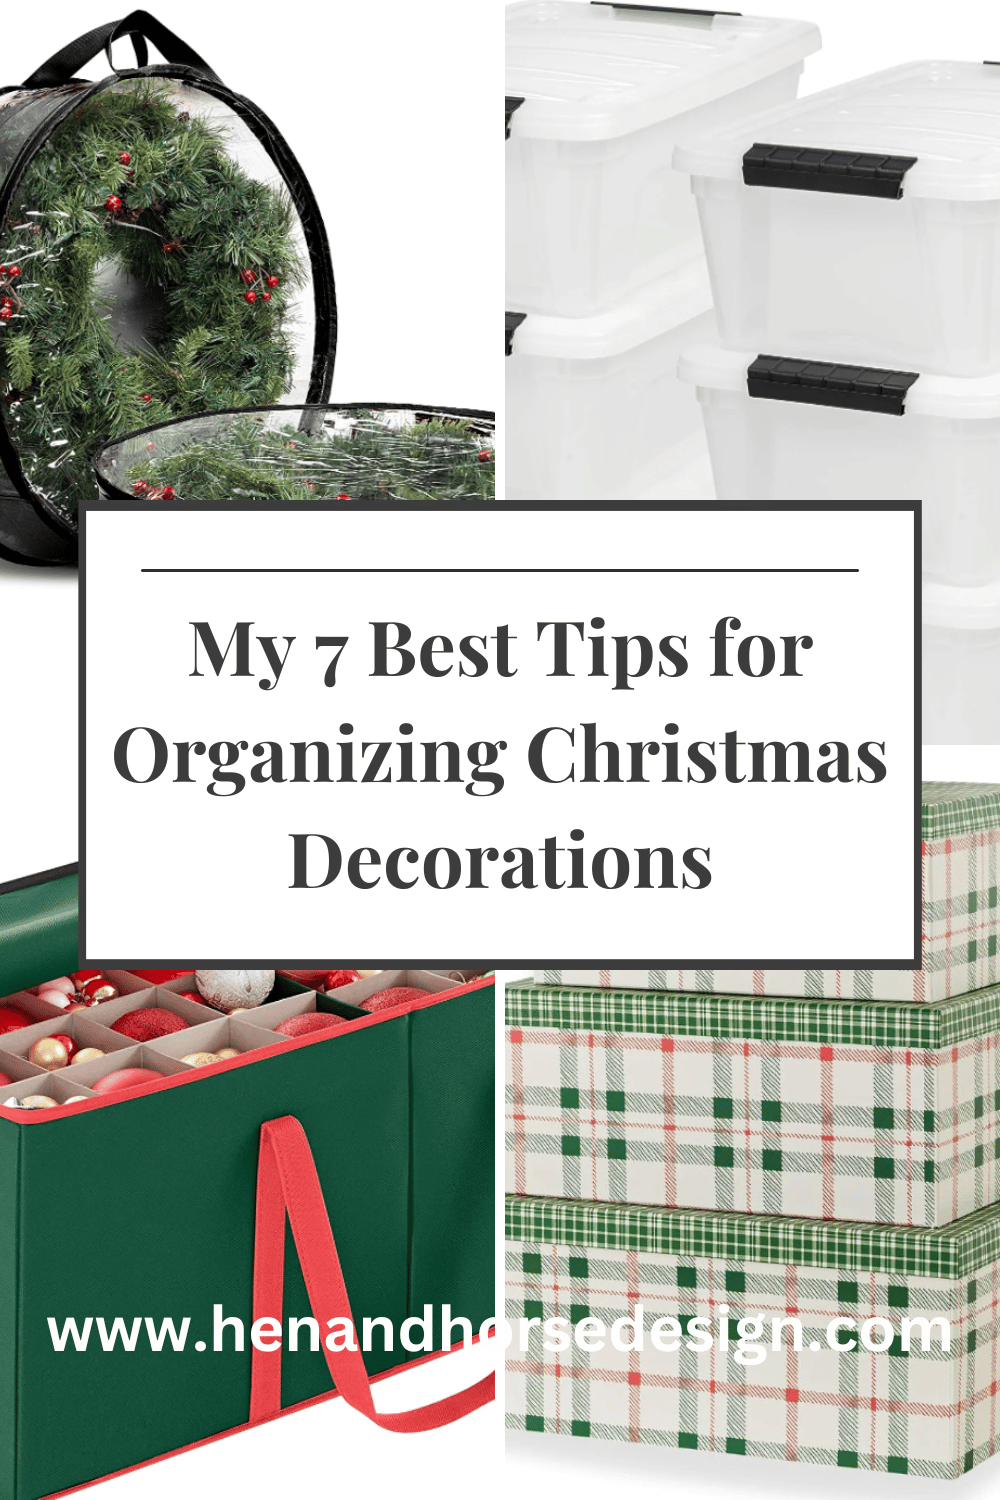 My 7 Best Tips for Organizing Christmas Decorations